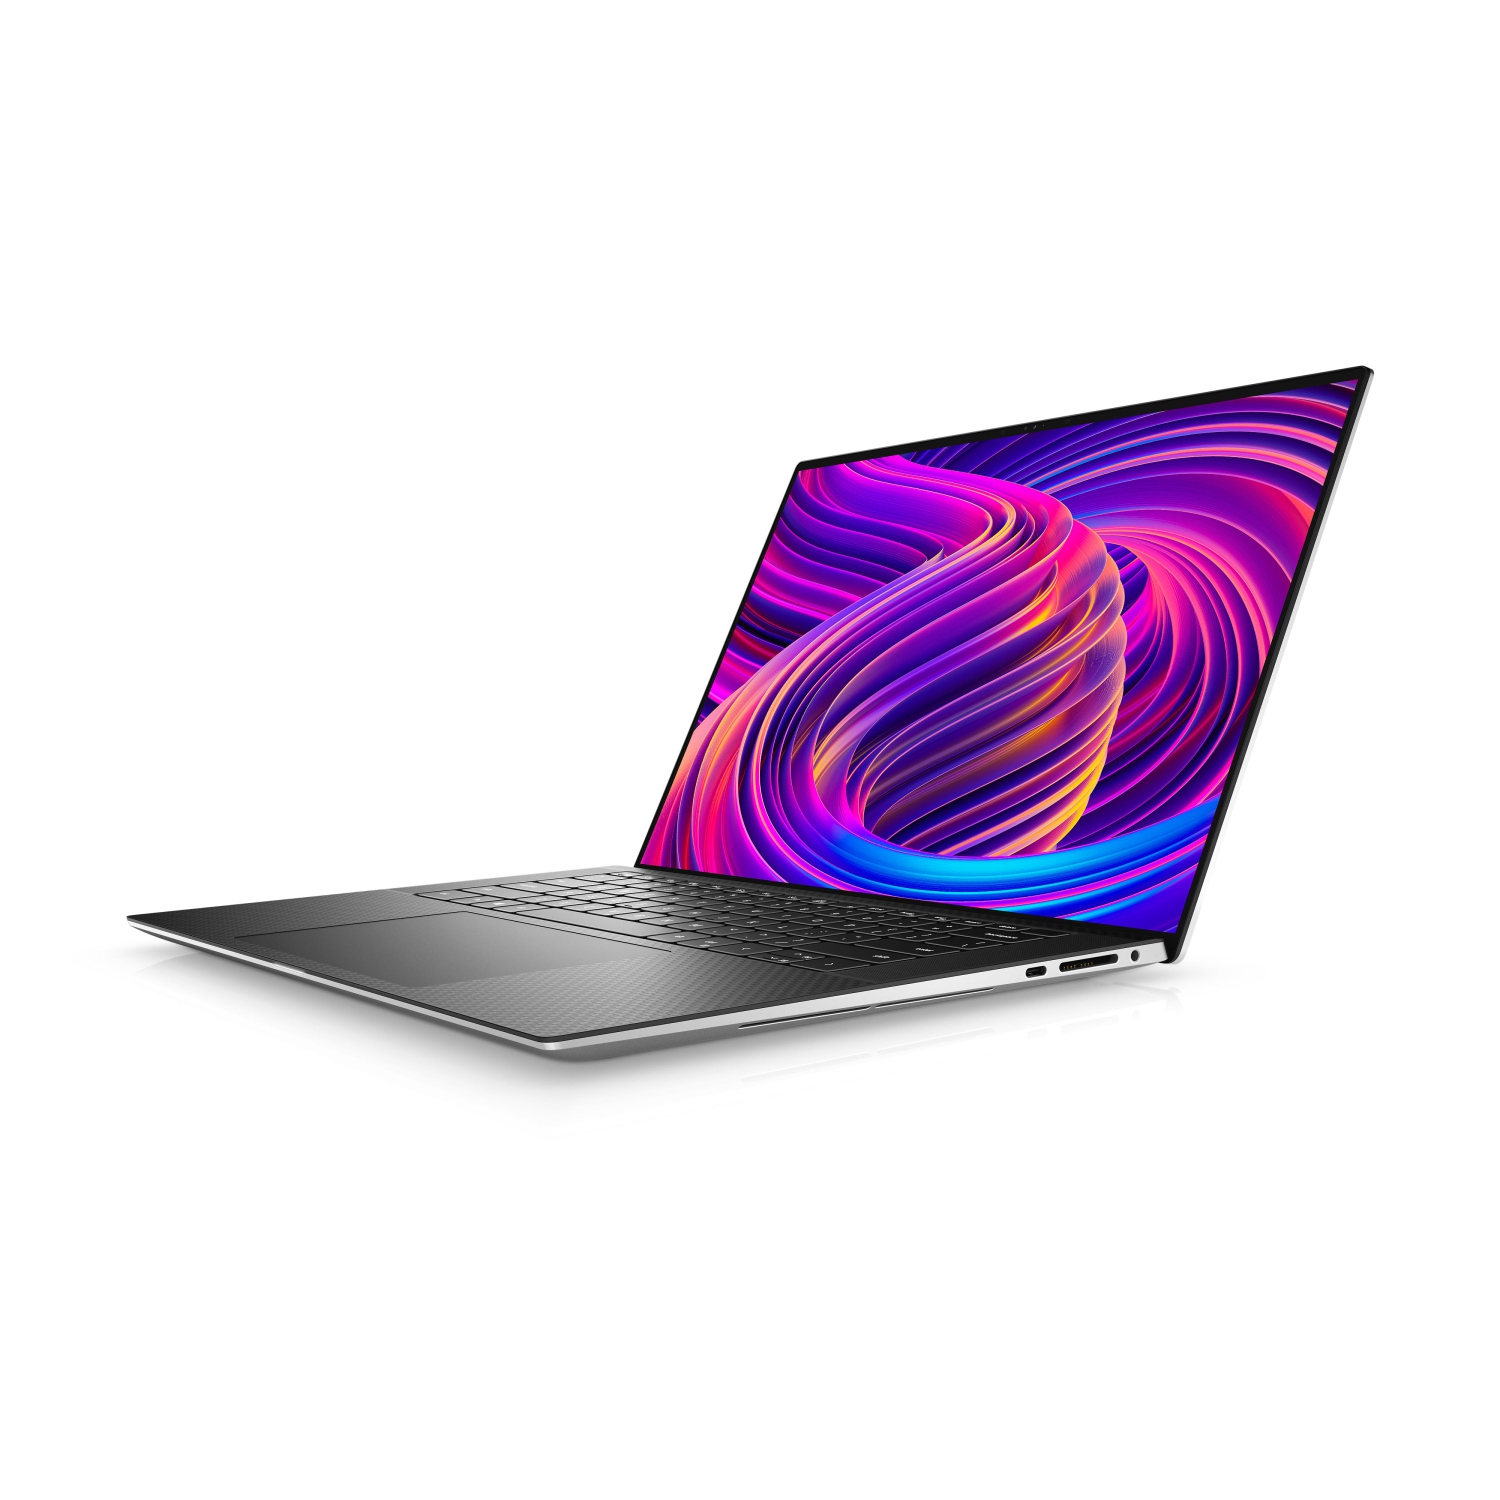 Refurbished (Excellent) - Dell XPS 15 9510 Laptop (2021), 15.6" 4K Touch, Core i7 - 1TB SSD - 64GB RAM - RTX 3050, 8 Cores @ 4.6 GHz - 11th Gen CPU Certified Refurbished